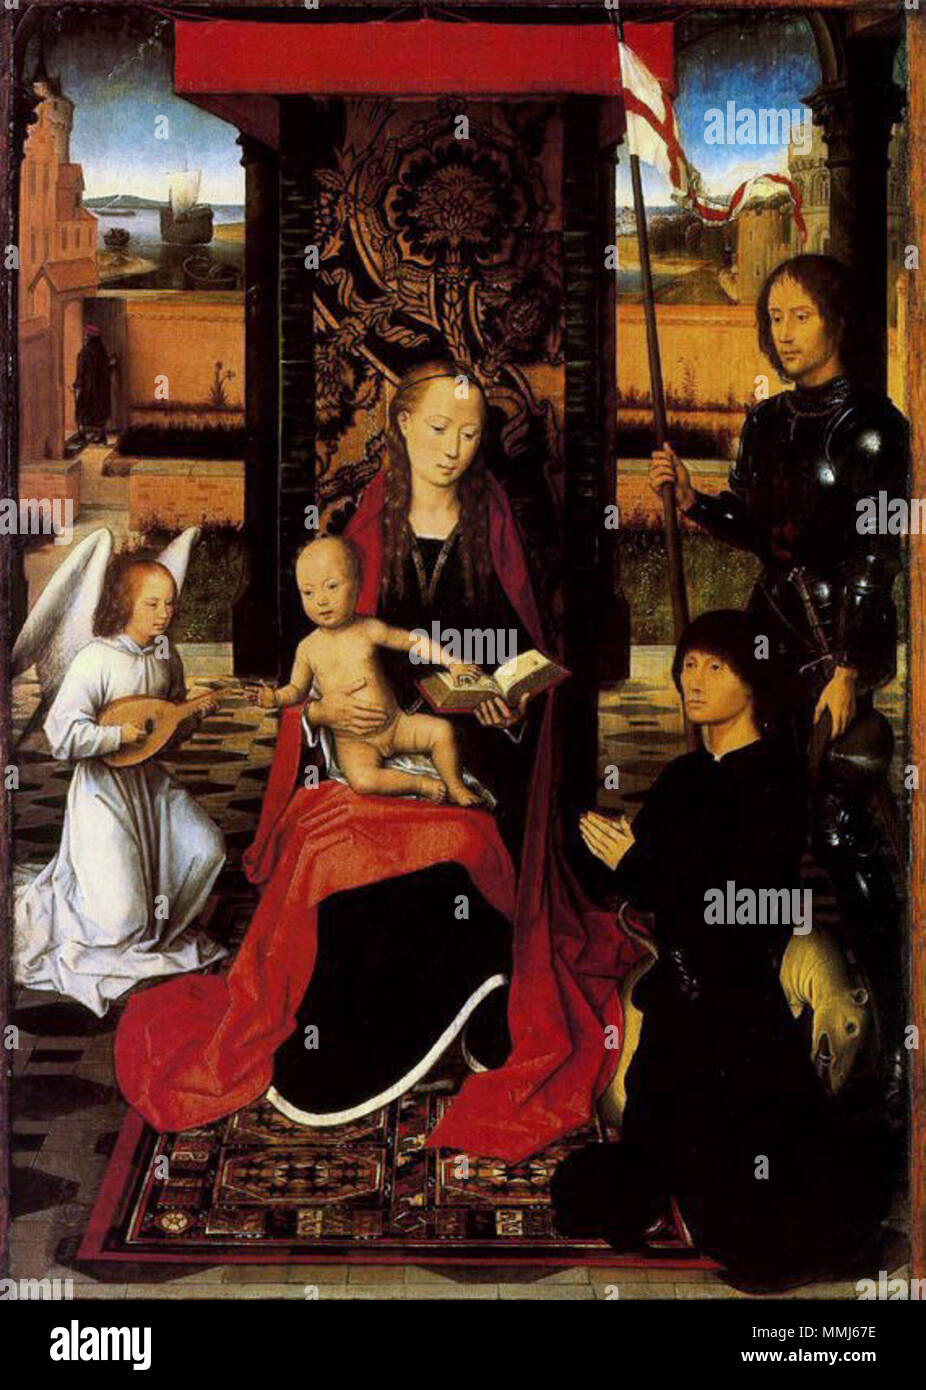 . English: Hans Memling Saint John Altarpiece The Mystic marriage of  Saint Catherine 1474 1479  . between 1474 and 1479.   Hans Memling  (circa 1433–1494)     Alternative names Hans Memlinc, Jan van Memmelynghe  Description Flemish painter and draughtsman  Date of birth/death circa 1433 11 August 1494  Location of birth/death Seligenstadt near Aschaffenburg (?) Bruges  Work location Cologne (?), Brussels, Bruges (1466–1494)  Authority control  : Q106851 VIAF:?36926265 ISNI:?0000 0001 2100 6549 ULAN:?500005611 LCCN:?n50013910 NLA:?35346391 WorldCat Hans Memling The Virgin and Child with Angel  Stock Photo